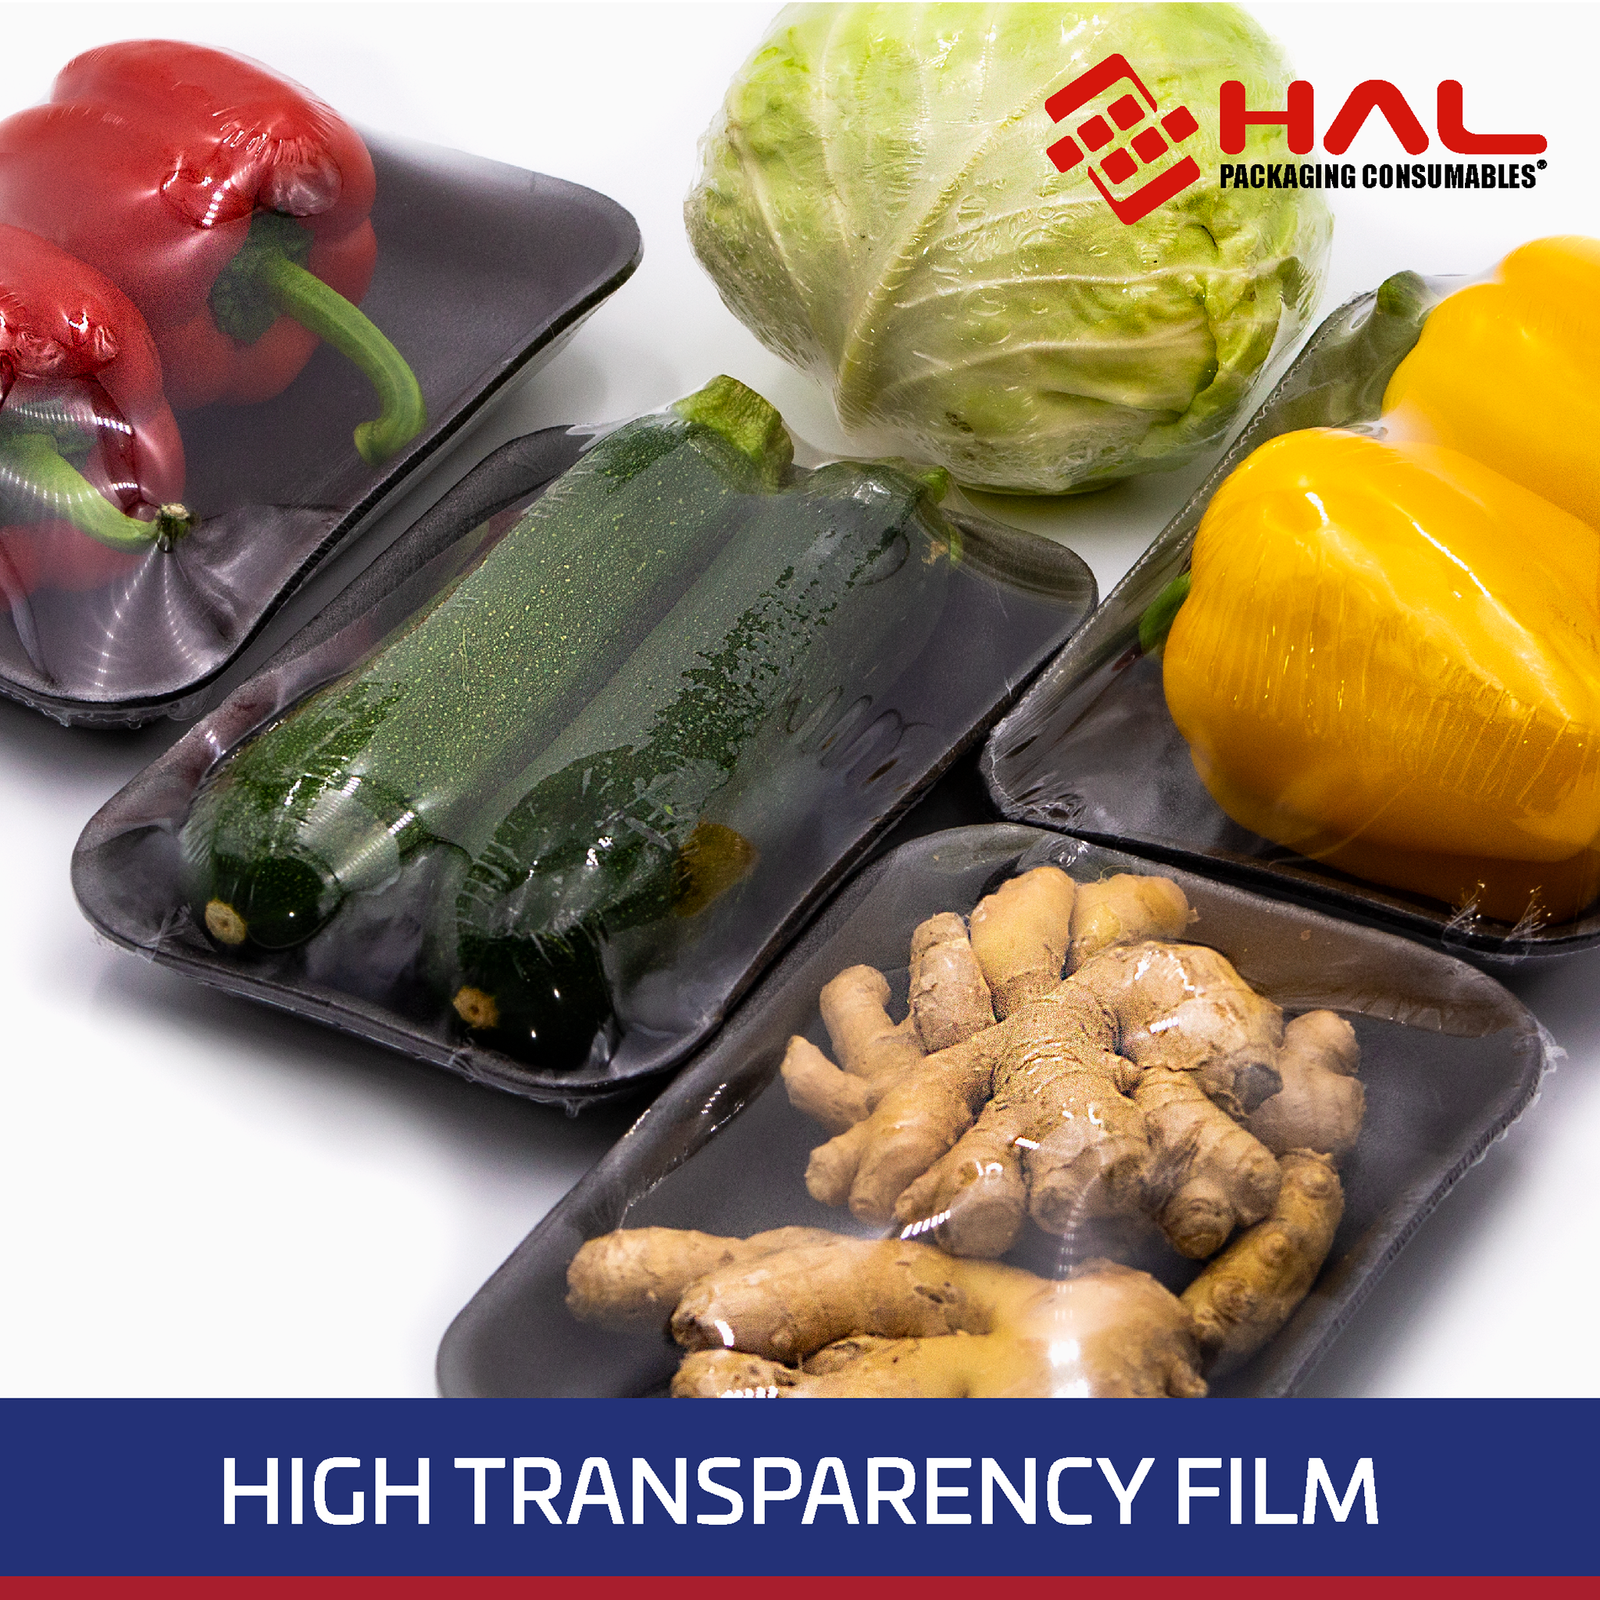 Several food items shrink packaged for protection. Blue and white text on the bottom reads: high transparency film